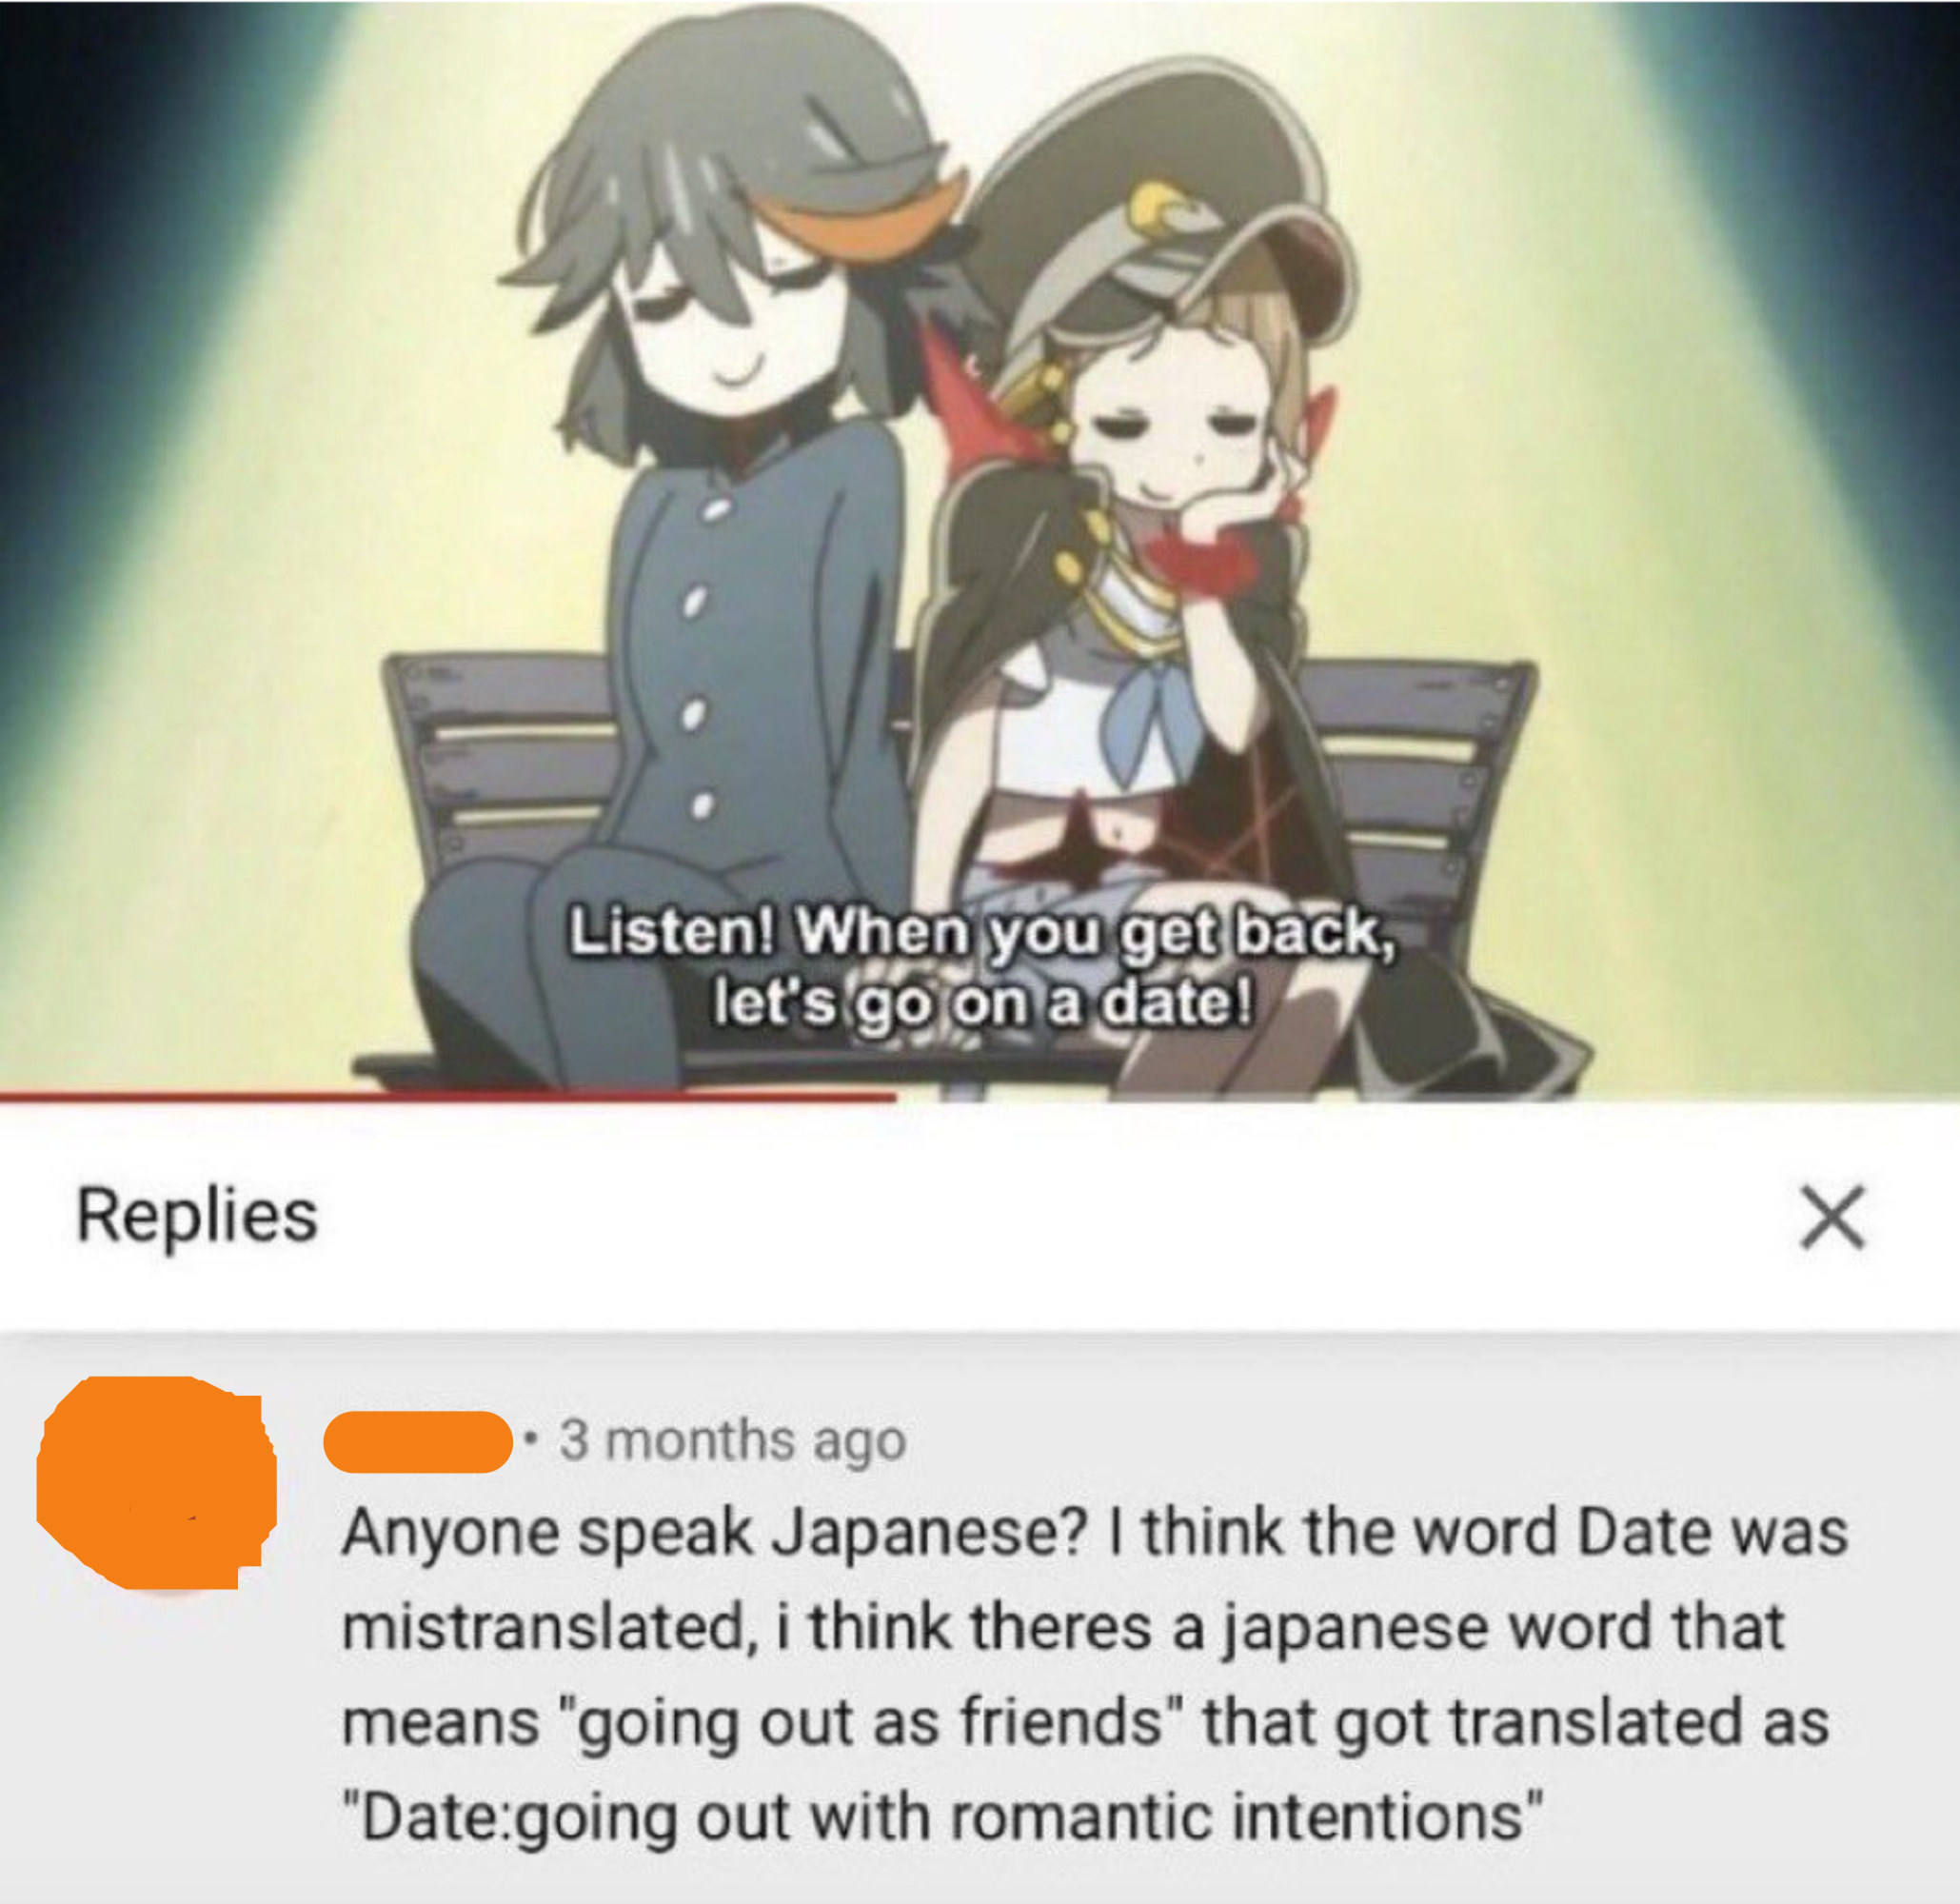 on an anime scene a person asks if maybe the english translation is wrong and that the 2 woman aren&#x27;t actually trying to go on a date but actually just hang out as friends